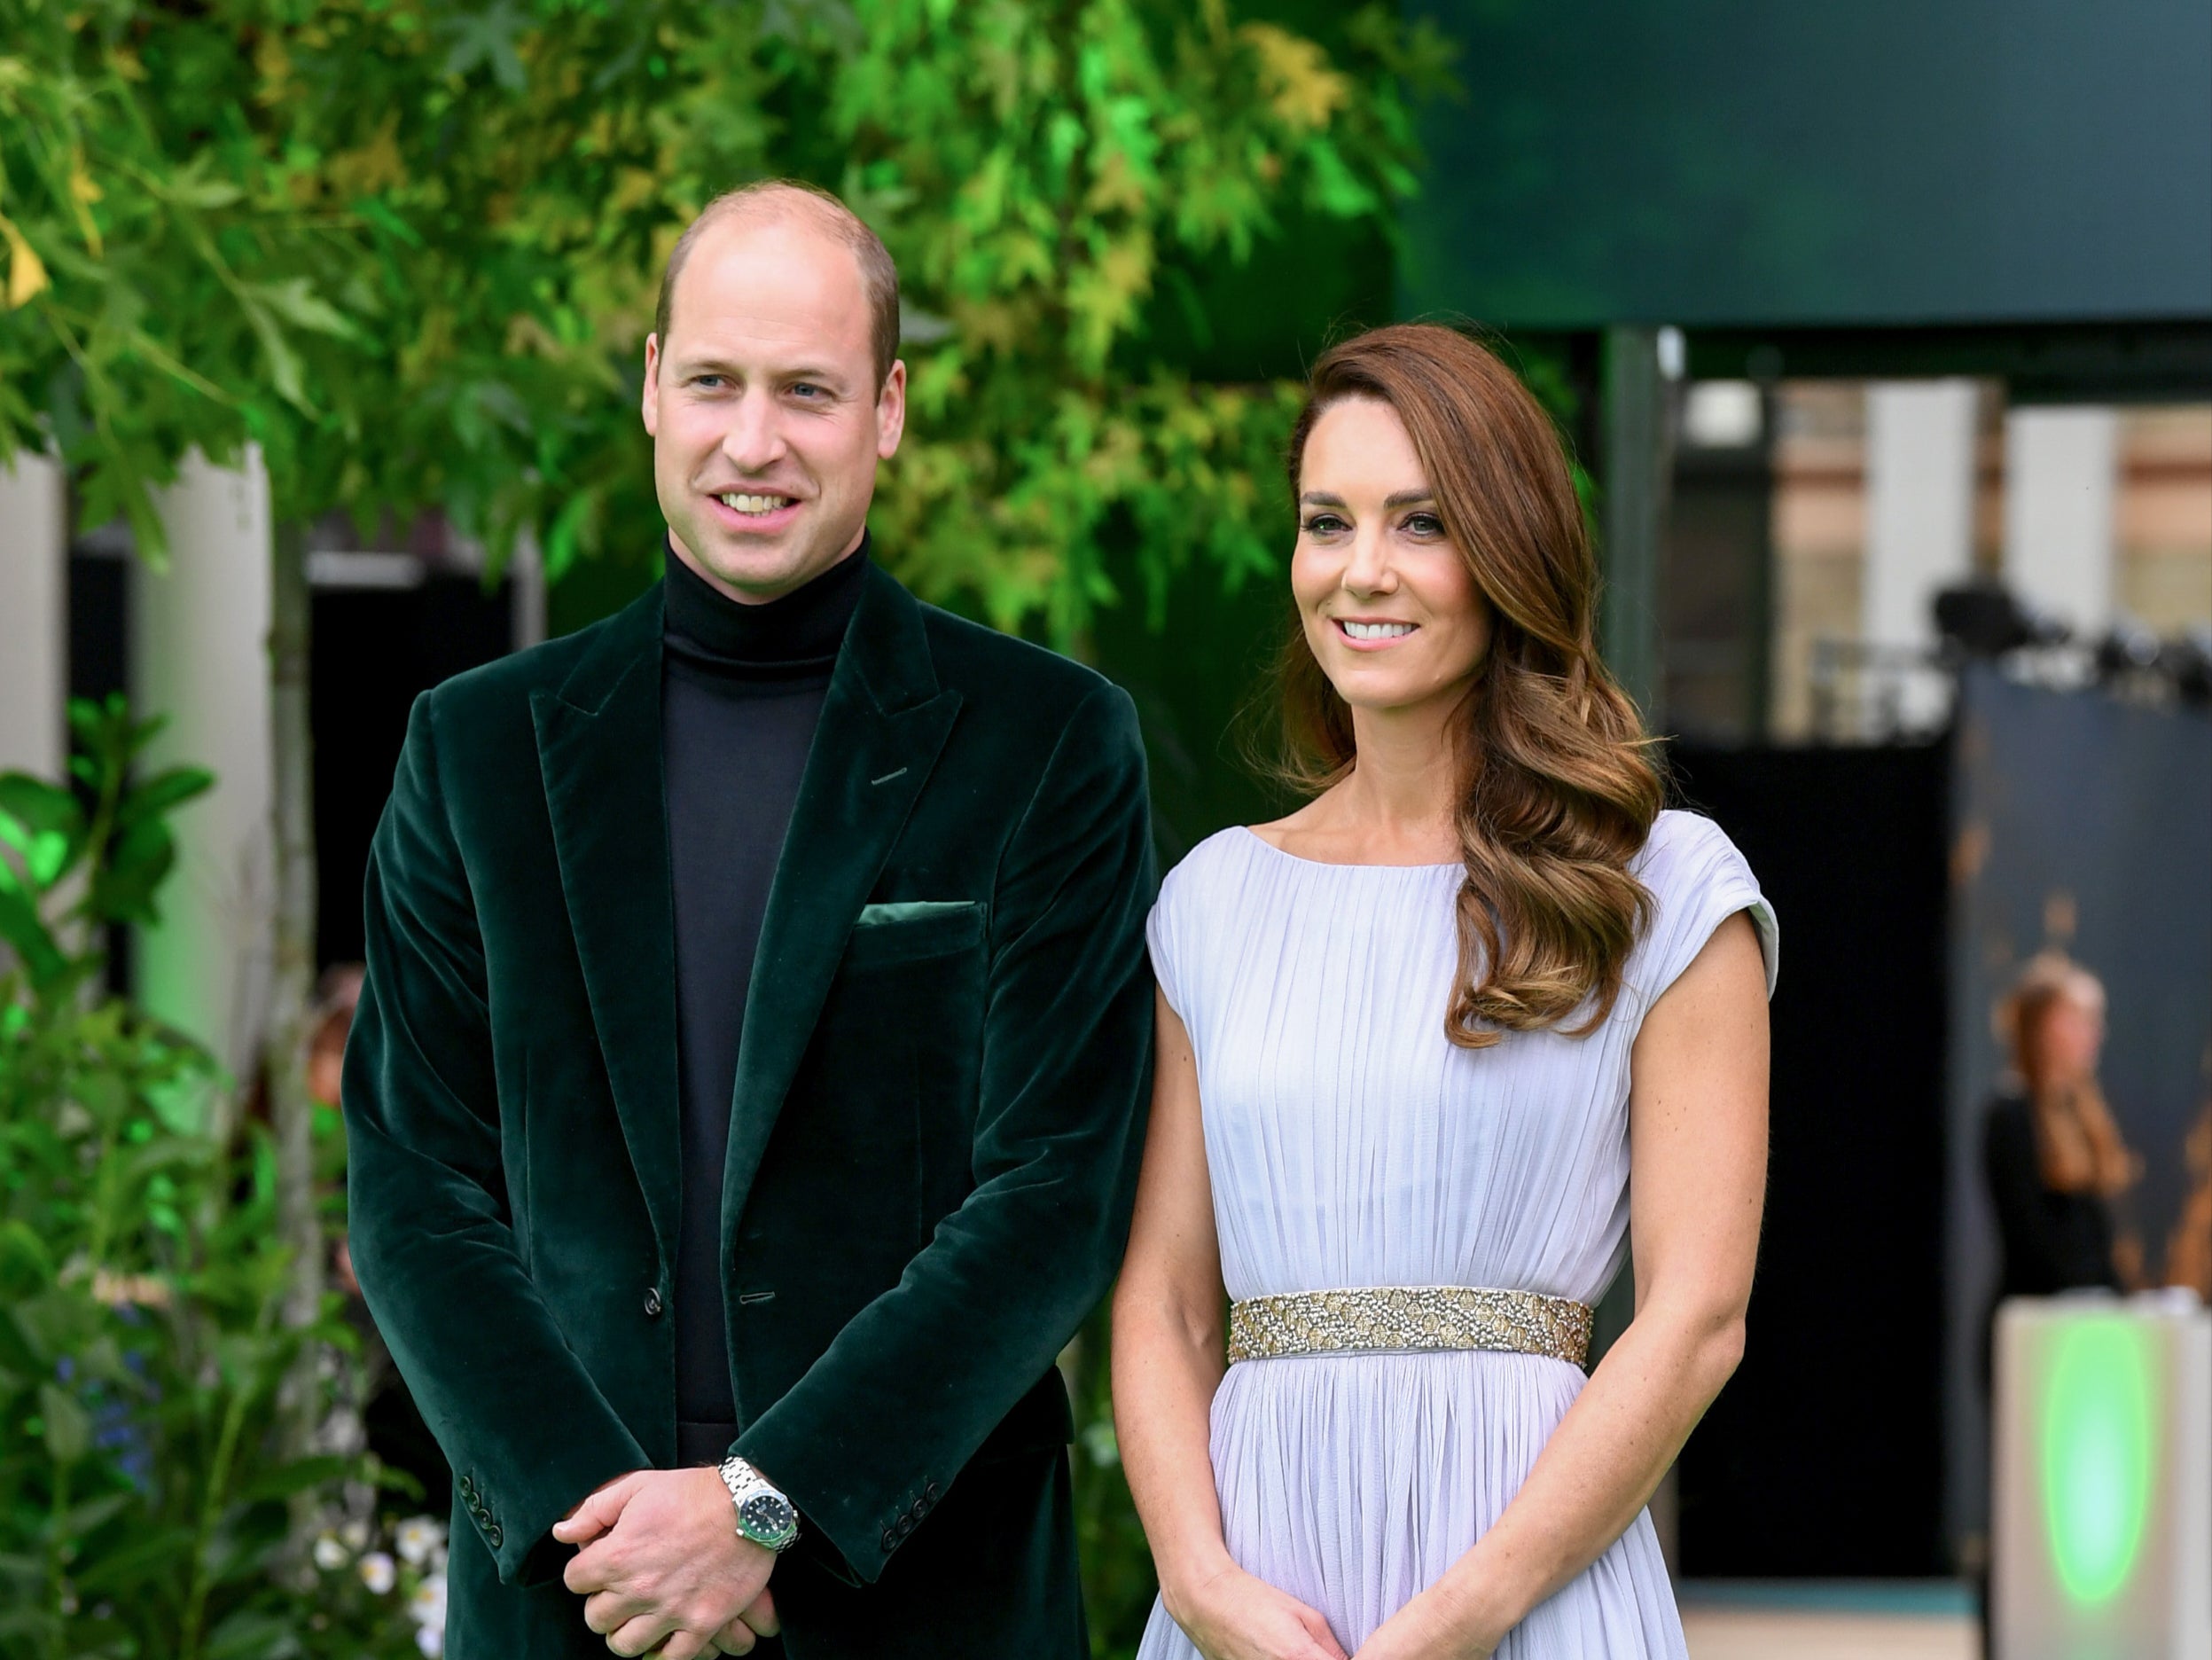 The Duke and Duchess of Cambridge attend the ceremony in “recycled” clothes